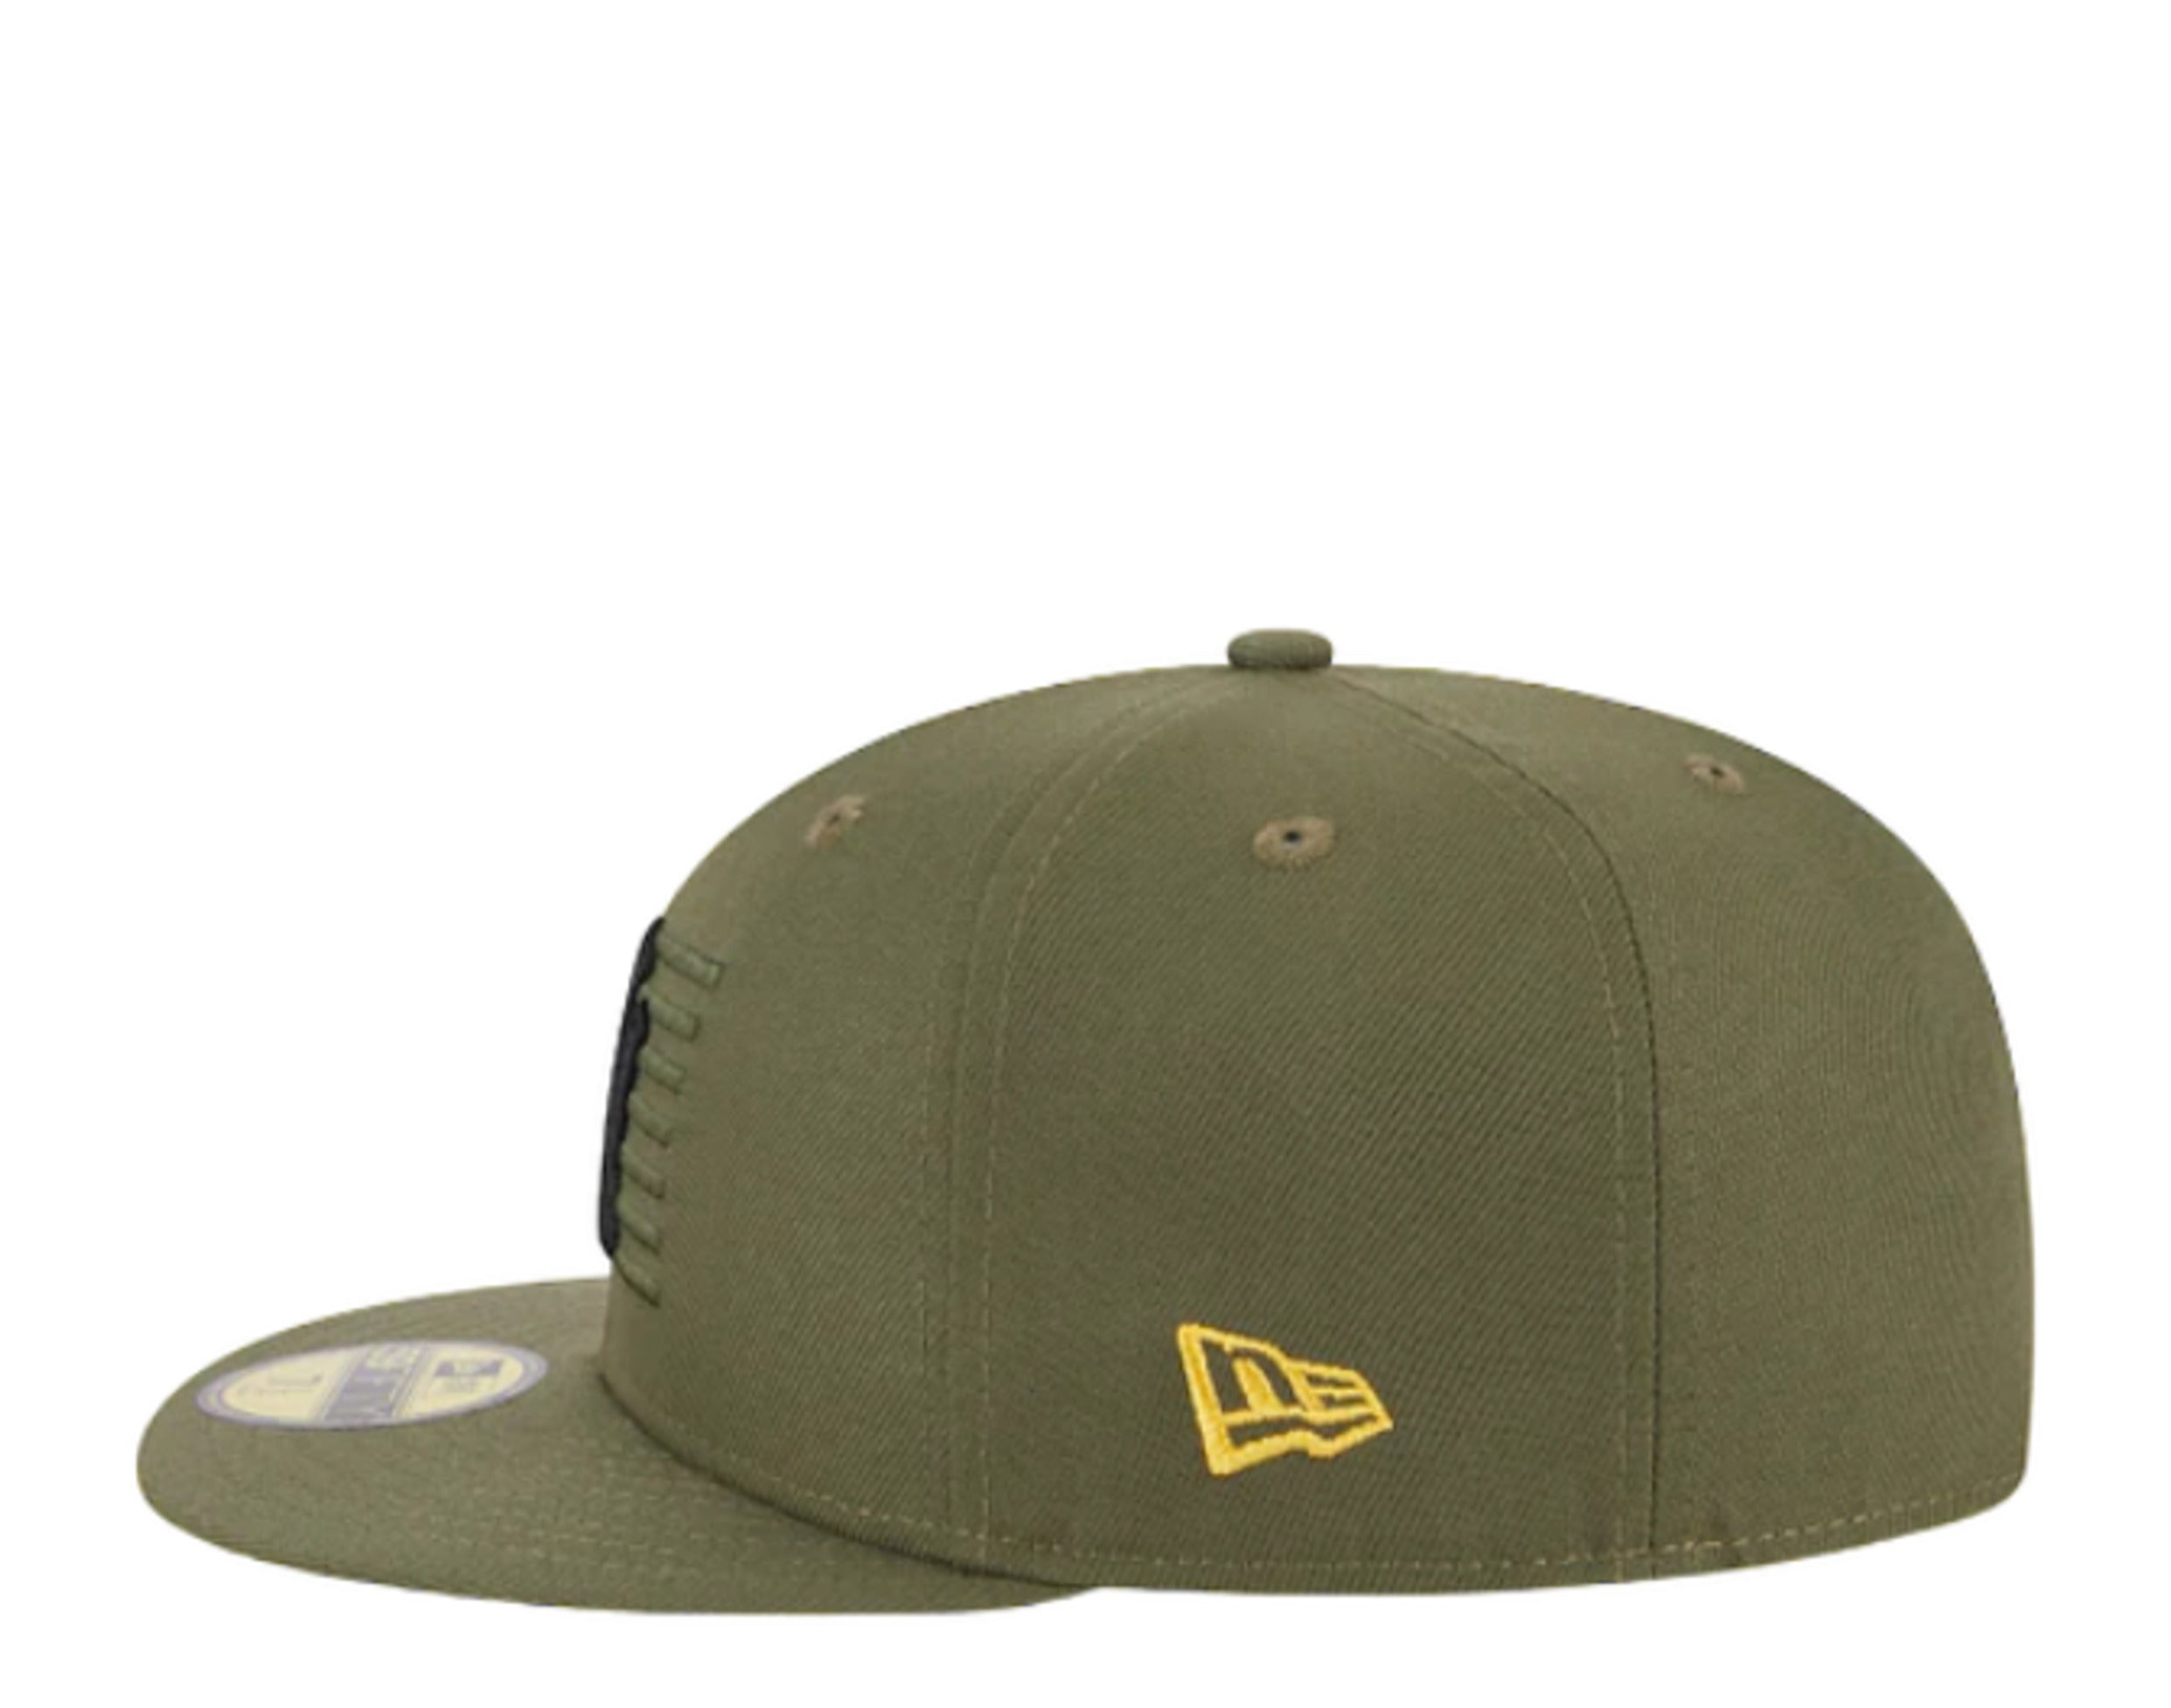  New Era 2021 MLB Armed Forces Day 9Fifty 950 Snapback  Adjustable Hat - Camo (New York Yankees) : Sports & Outdoors